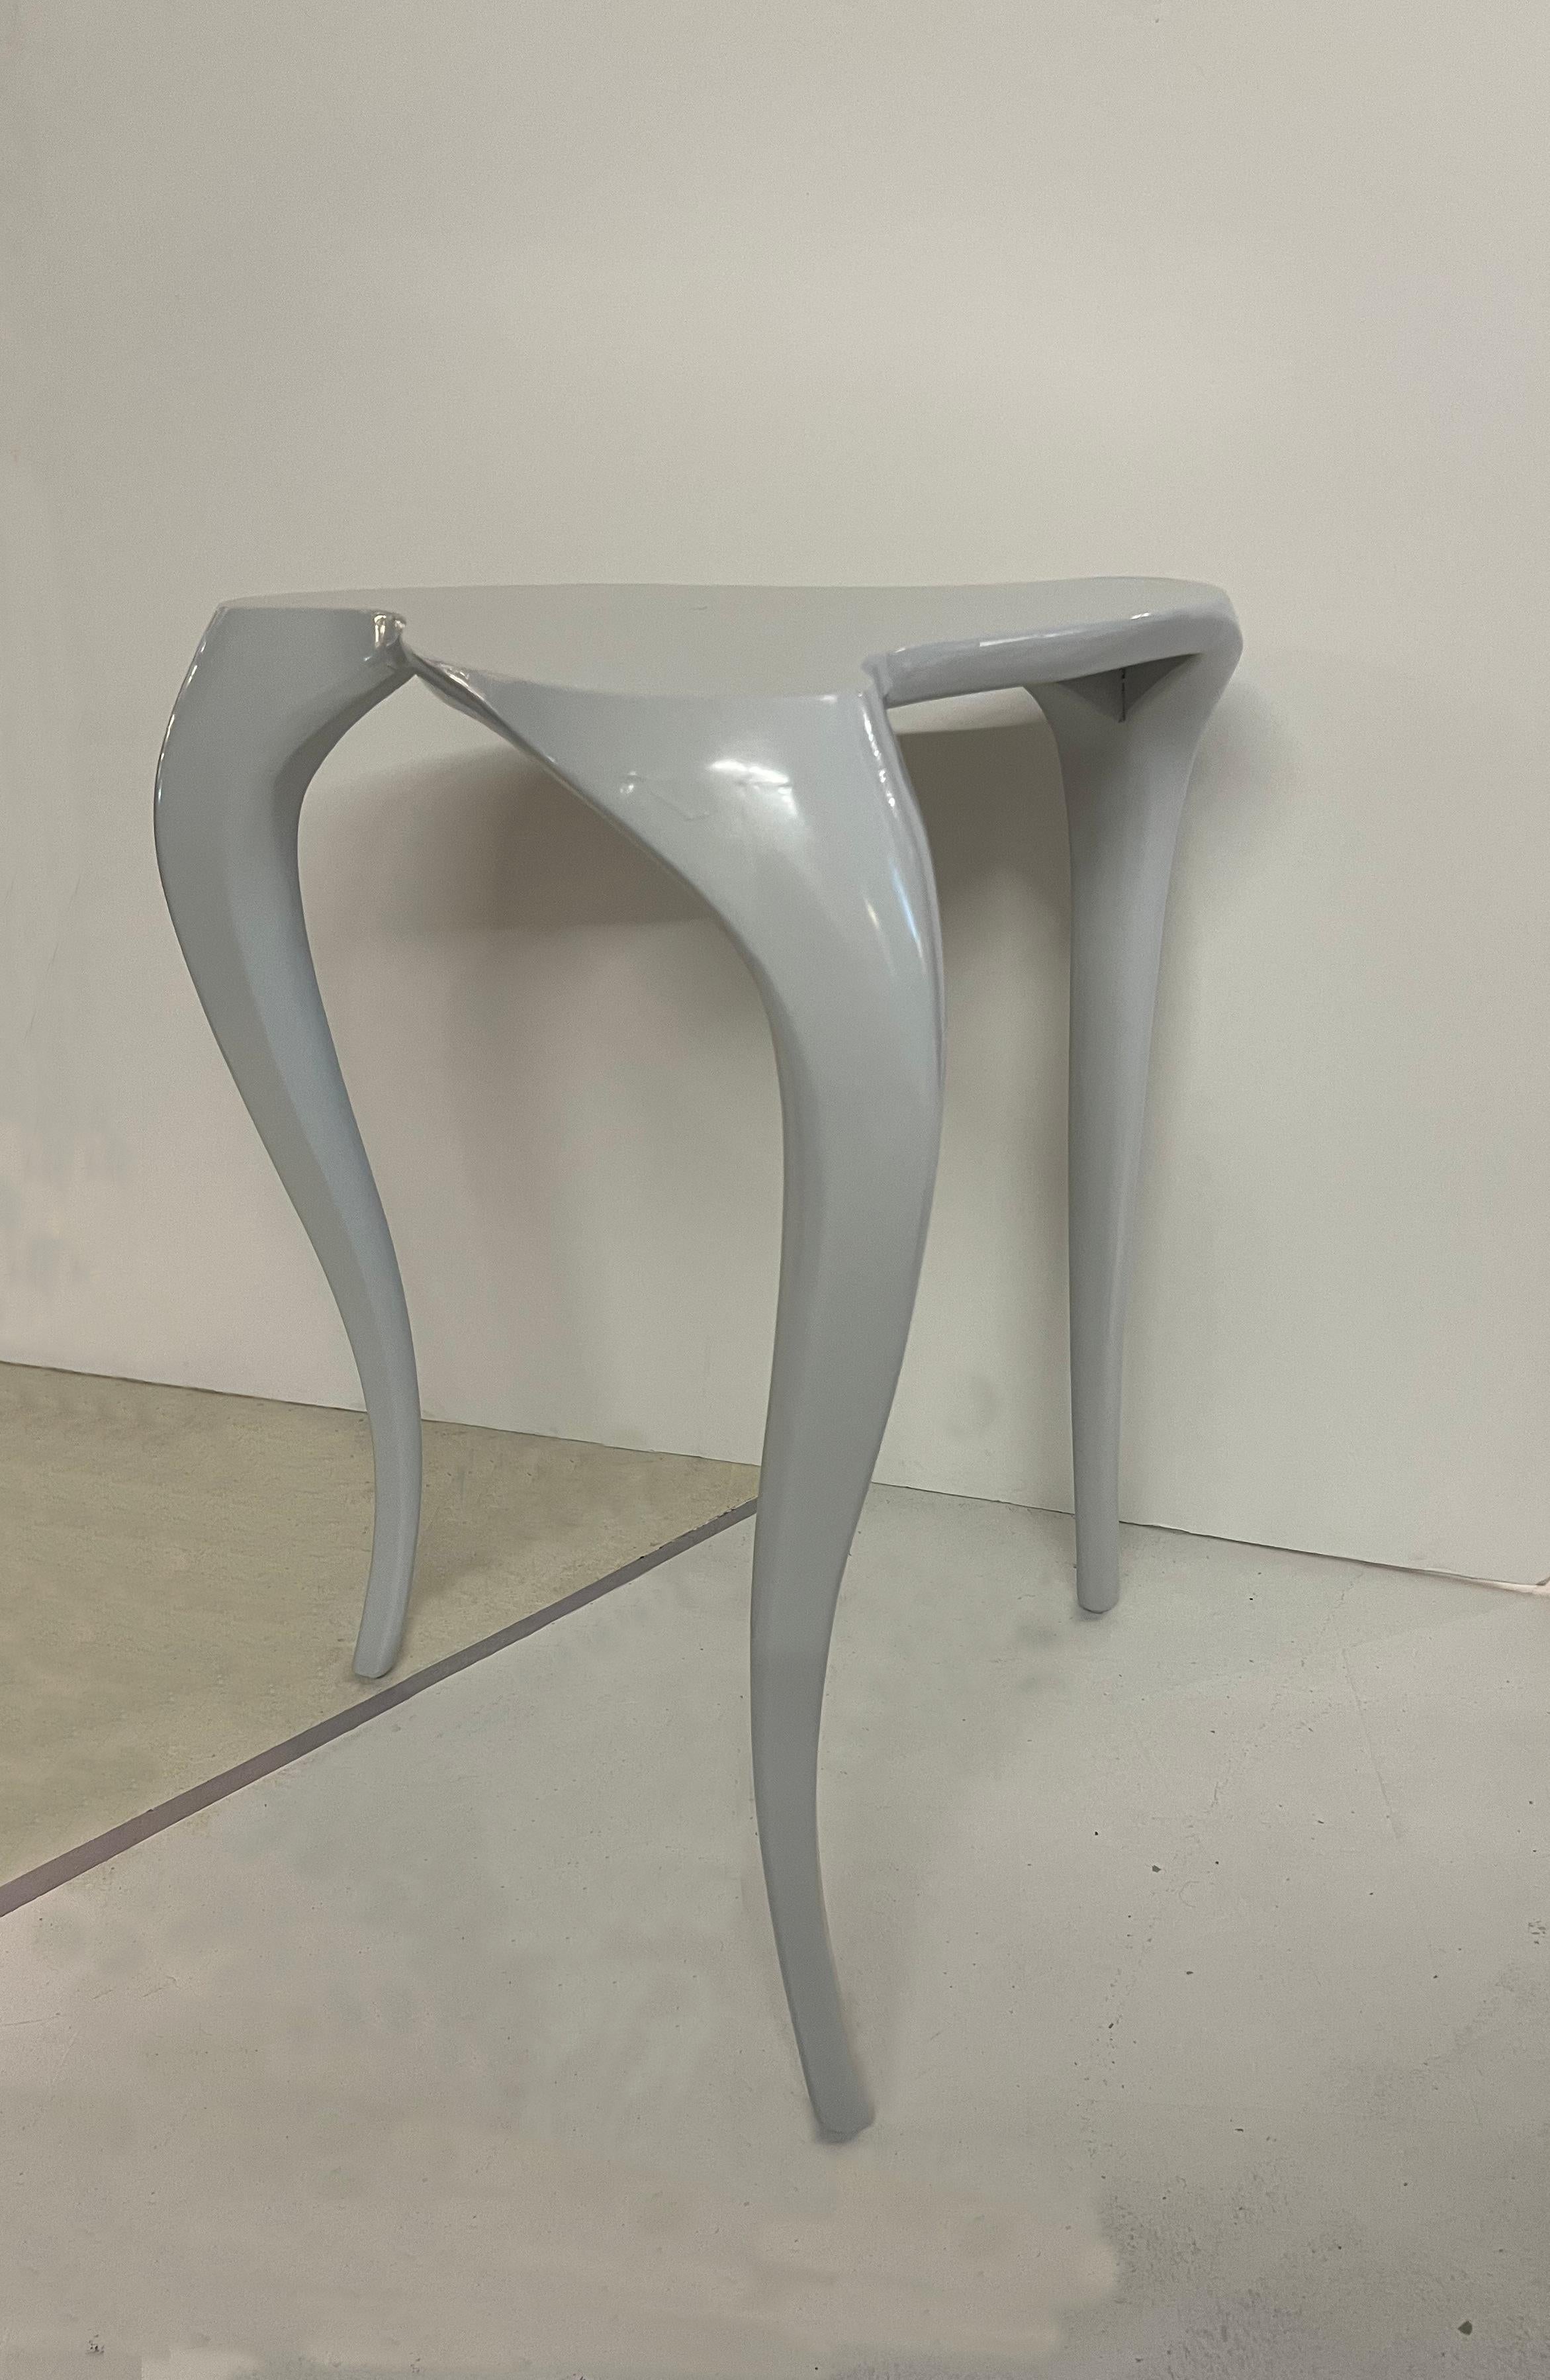 Incredible pair of Hollywood Regency light grey lacquer side tables. They feature a very light grey lacquered body with a curved design on the top and three undulated legs.
The grey color is so light that following the light around them, they can